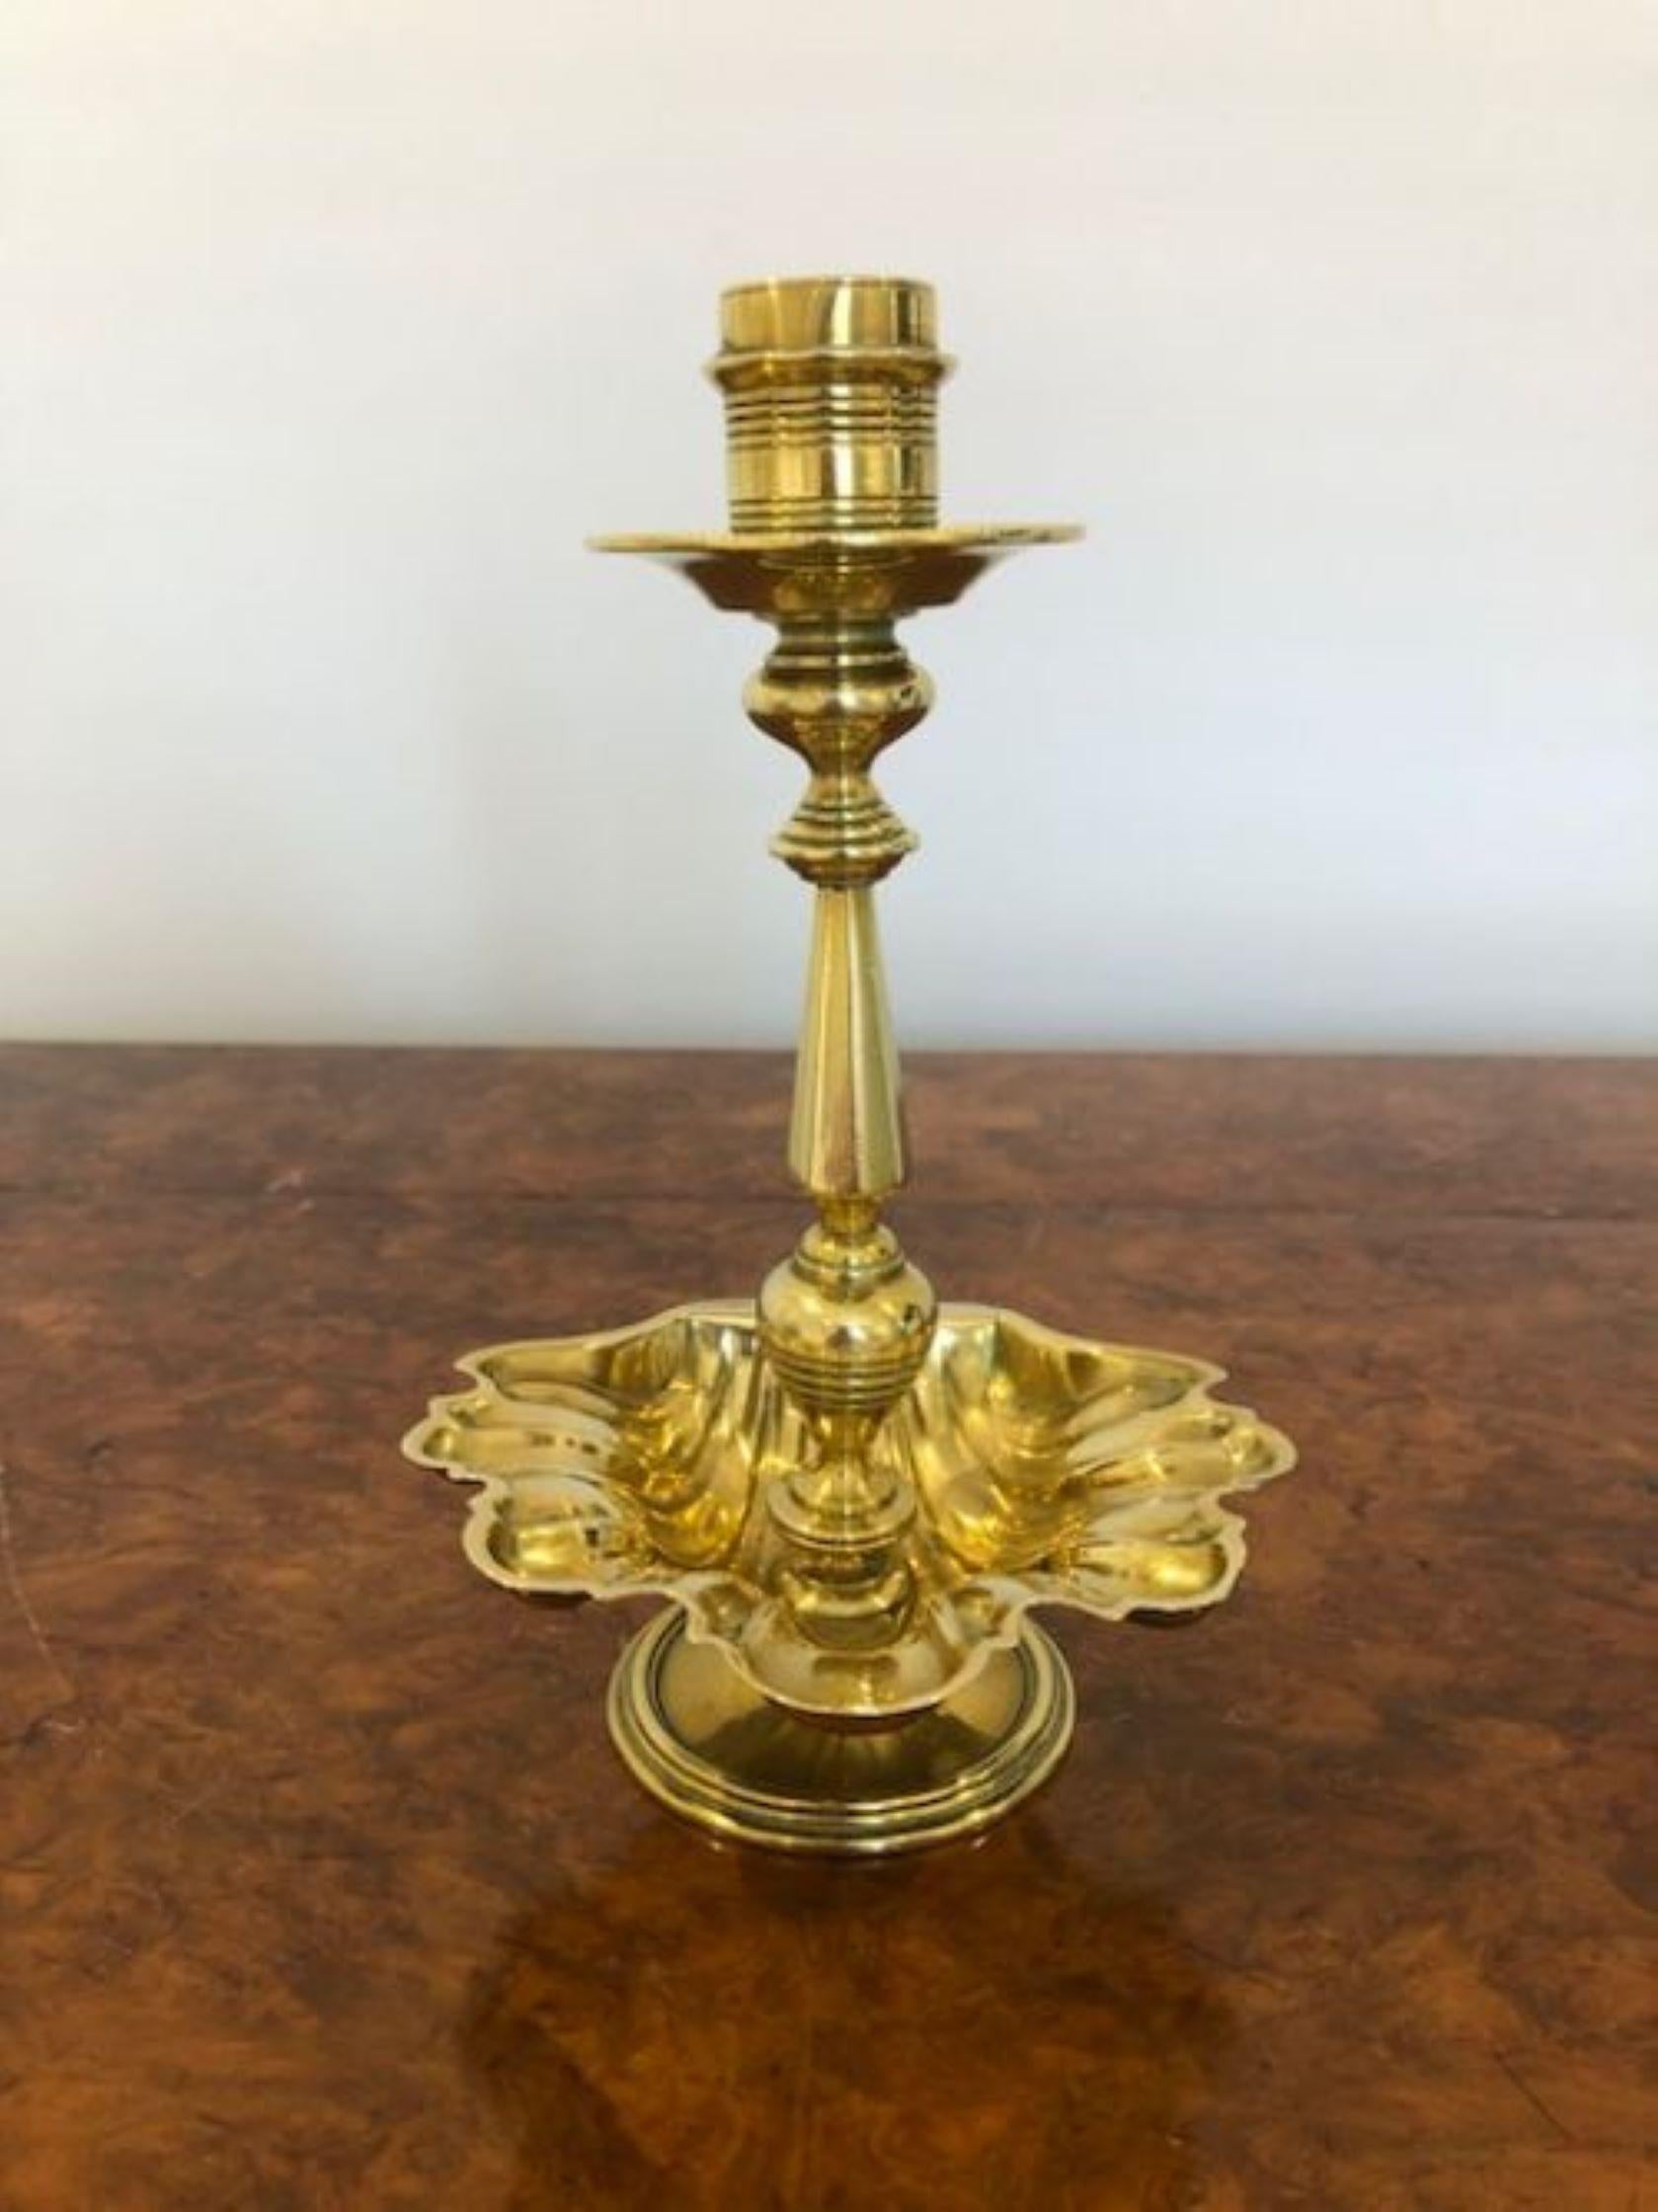 Unusual Pair of Antique Brass Candlesticks. Unusual shell shaped bases, with hexagon shaped columns, circular drip trays, and ring turned engraving